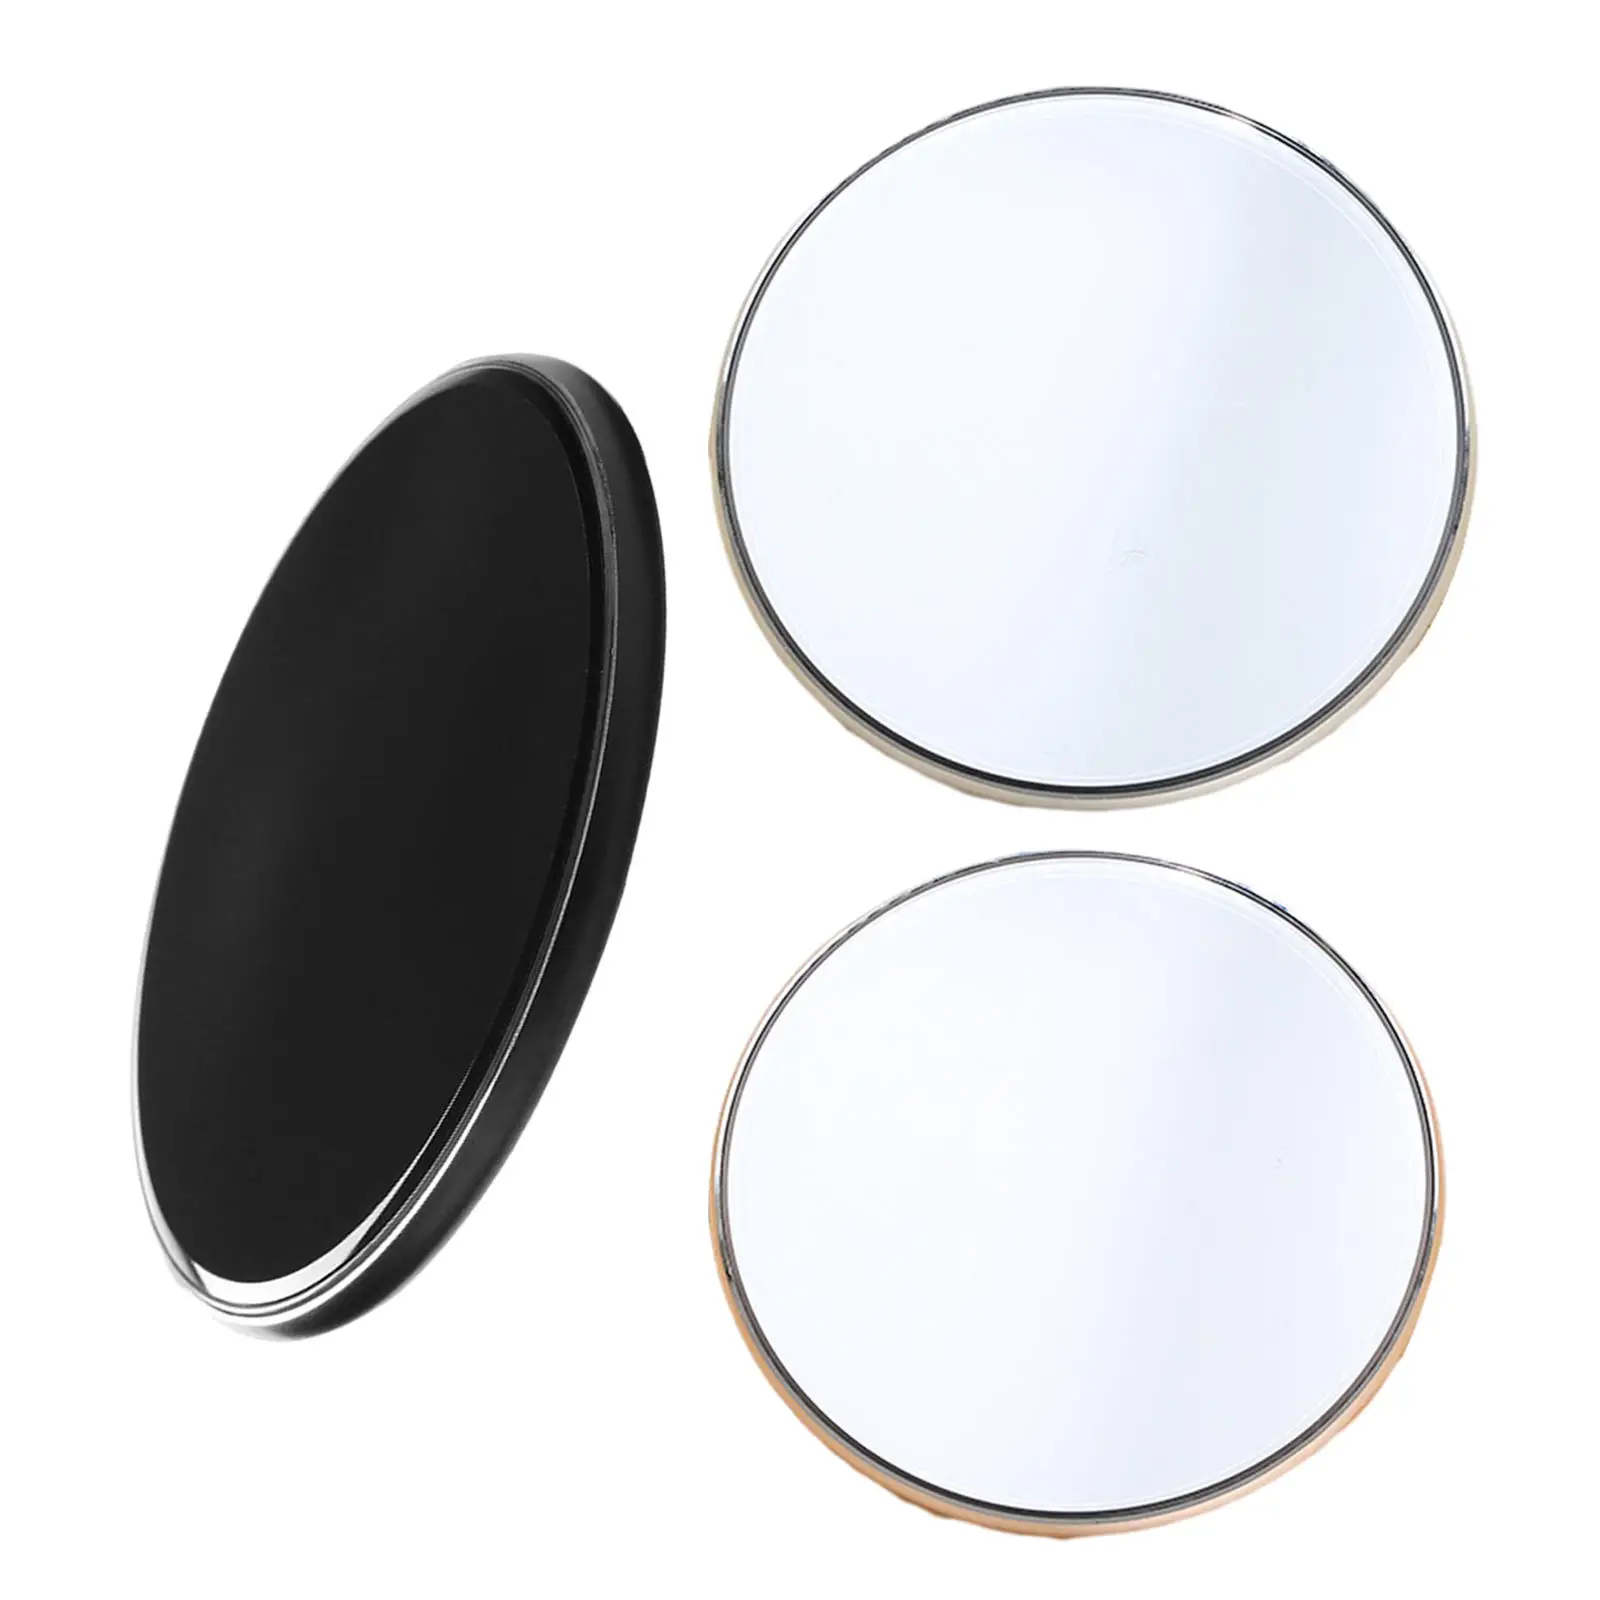 Small Qi Mirror Wireless Charger 10W Round Quickly Charge Desktop Charging Base with Indicator for Smartphone Travel Home Use